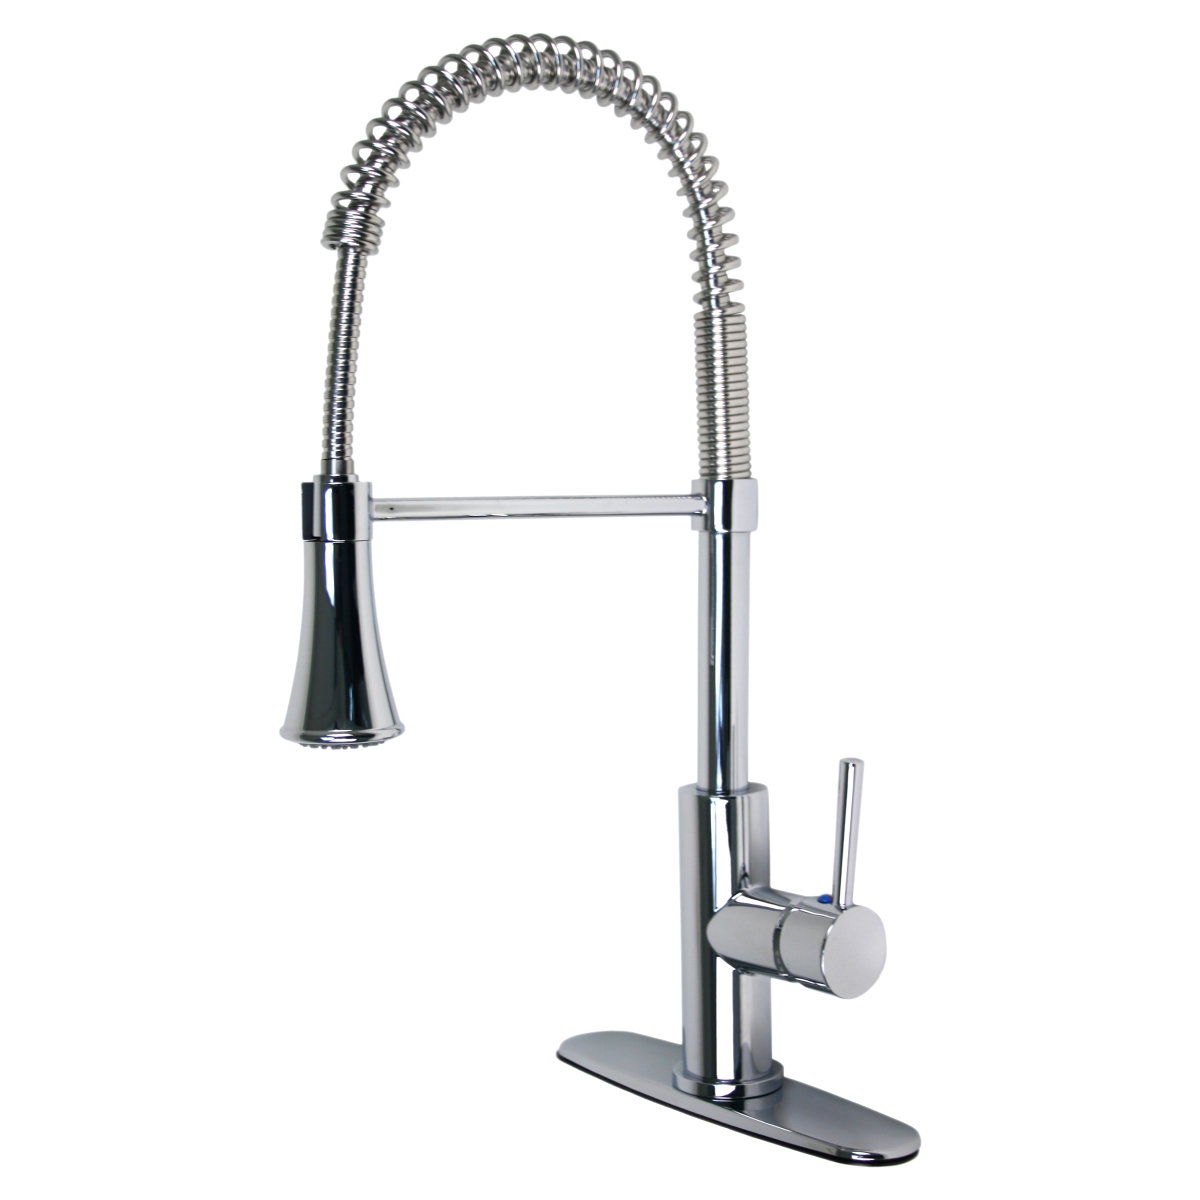 Uf17205 Oil Rubbed Bronze Single-handle Kitchen Faucet With Pull-down Spray